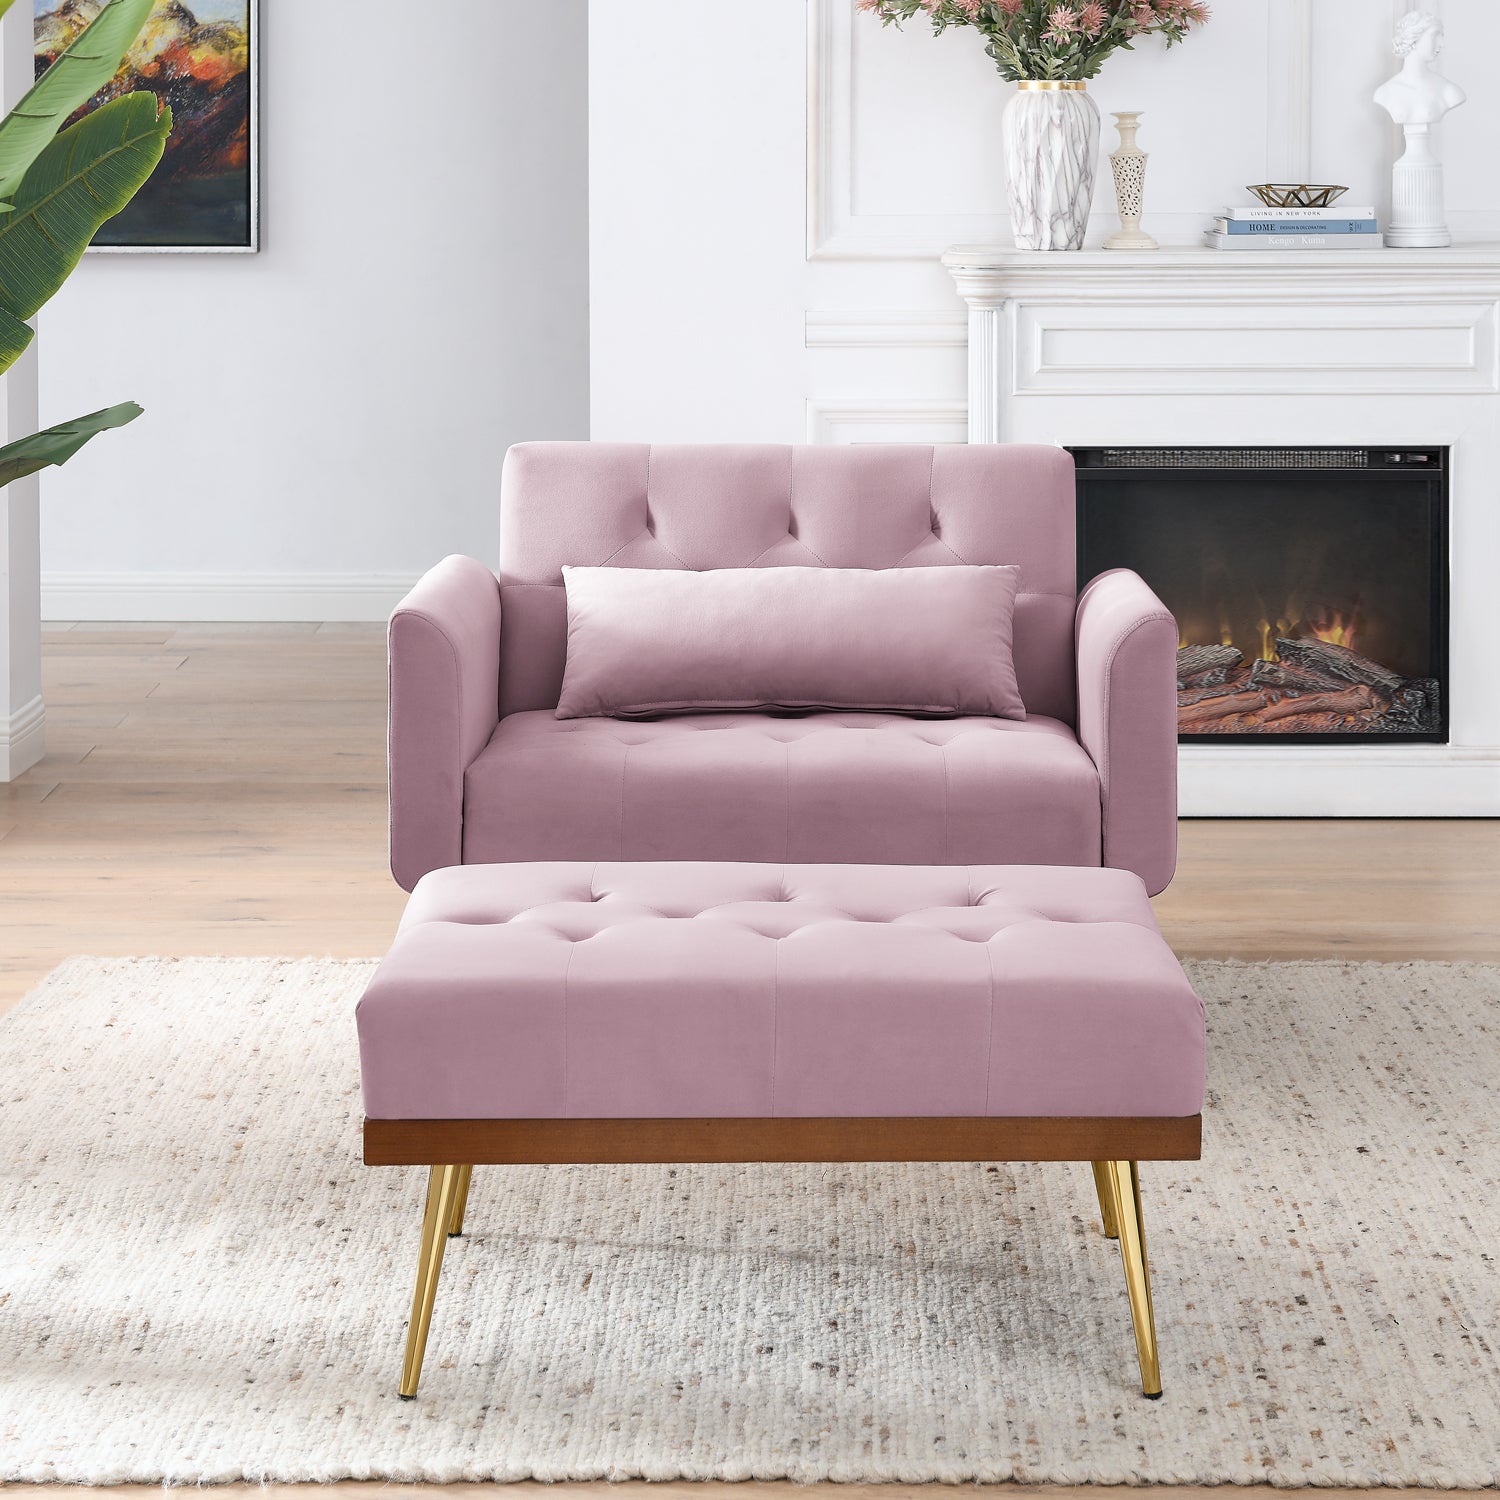 Recline Sofa Chair with Ottoman, Two Arm Pocket and Wood Frame include 1 Pillow, Pink (40.5”x33”x32”)